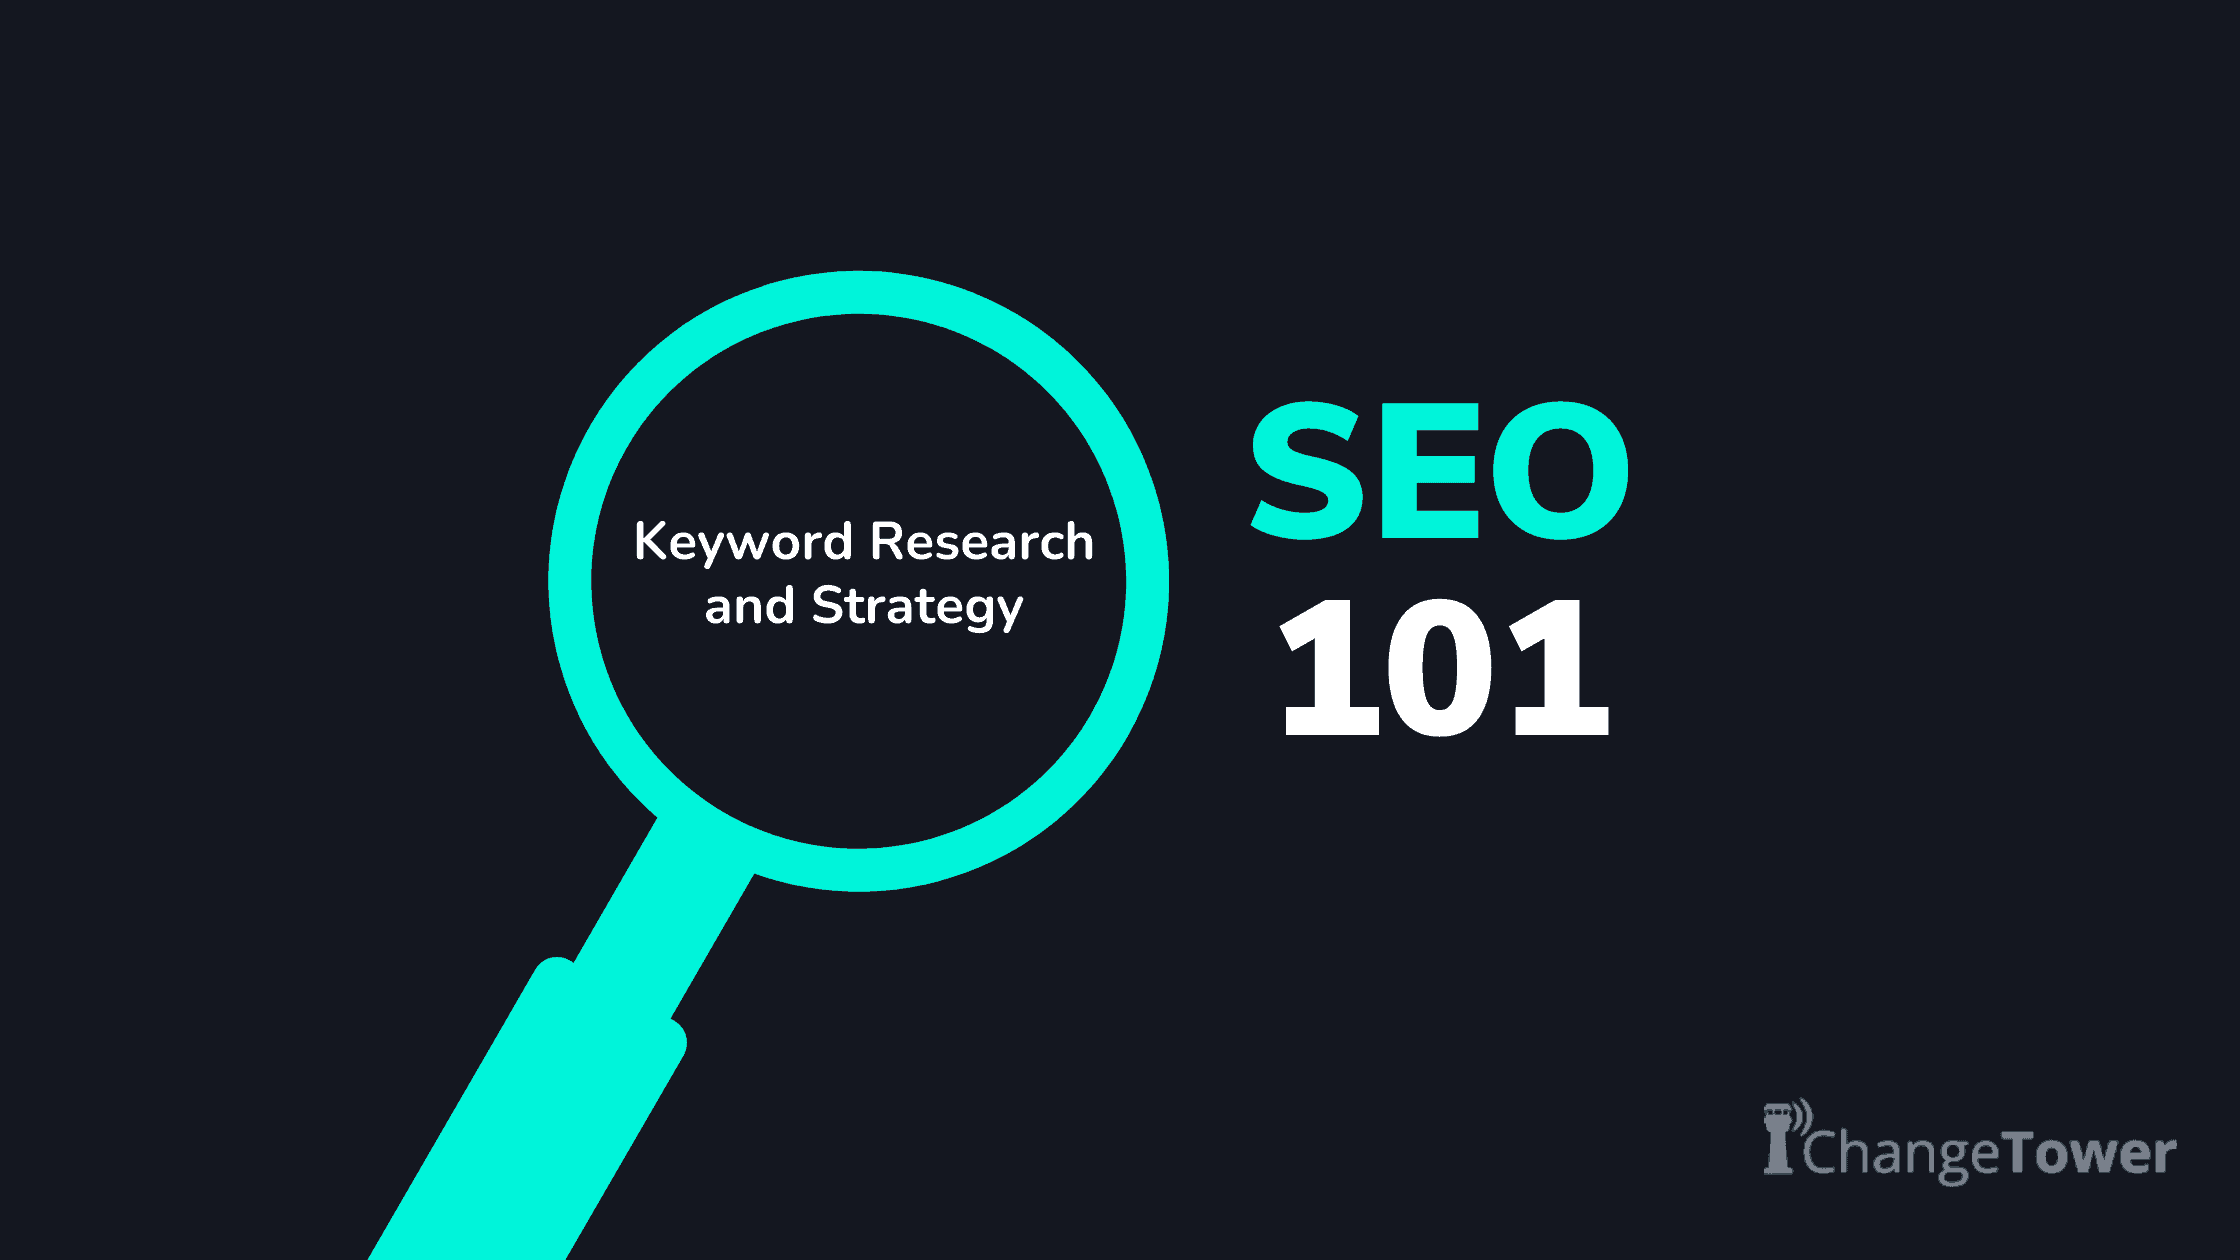 Keyword Research and Strategy - seo 101